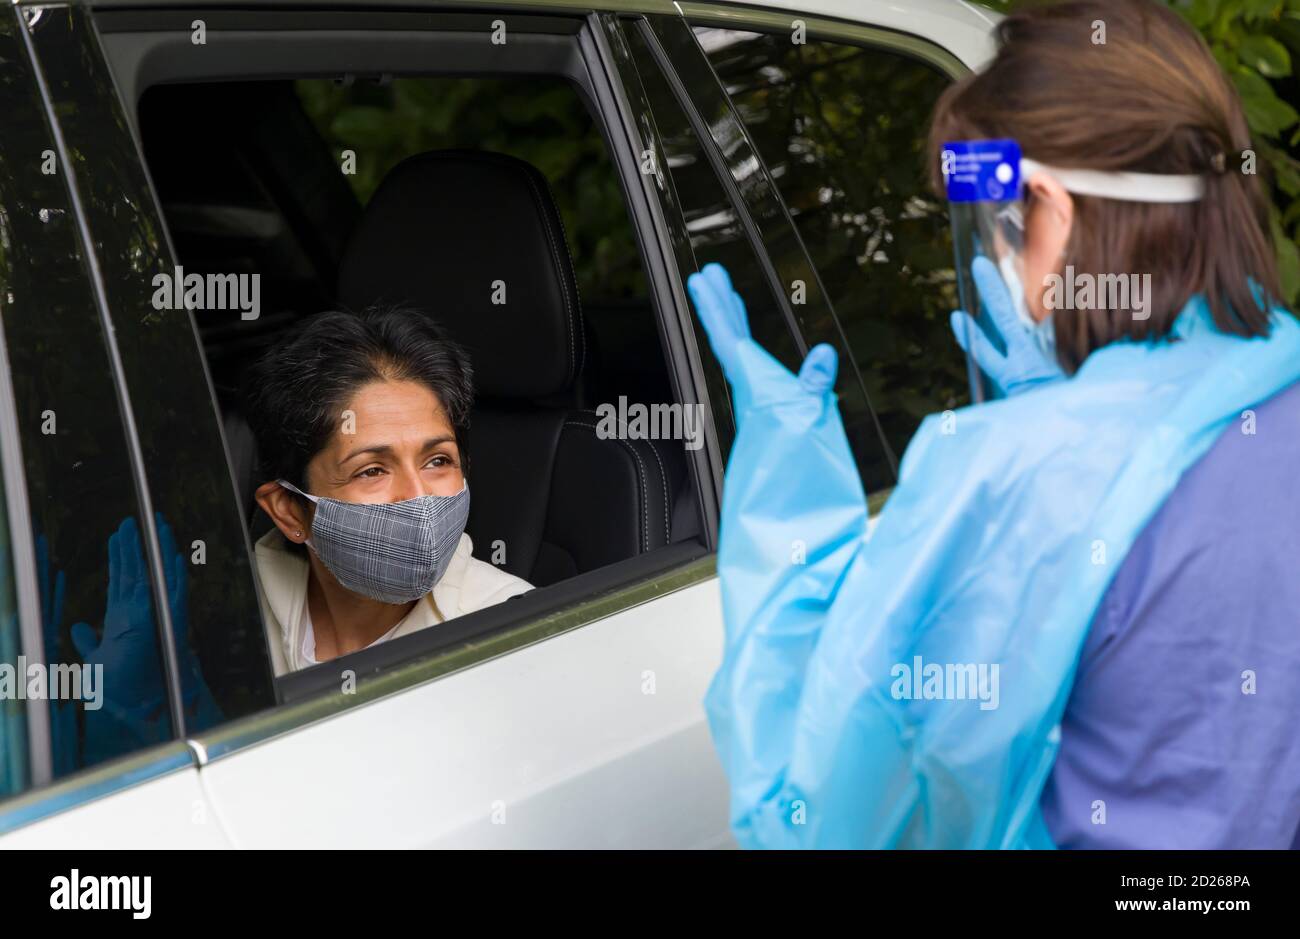 Coronavirus or COVID-19 prevention at a testing centre in England, UK. Asian woman in a car wearing a face mask, talking to a nurse in full PPE gear. Stock Photo